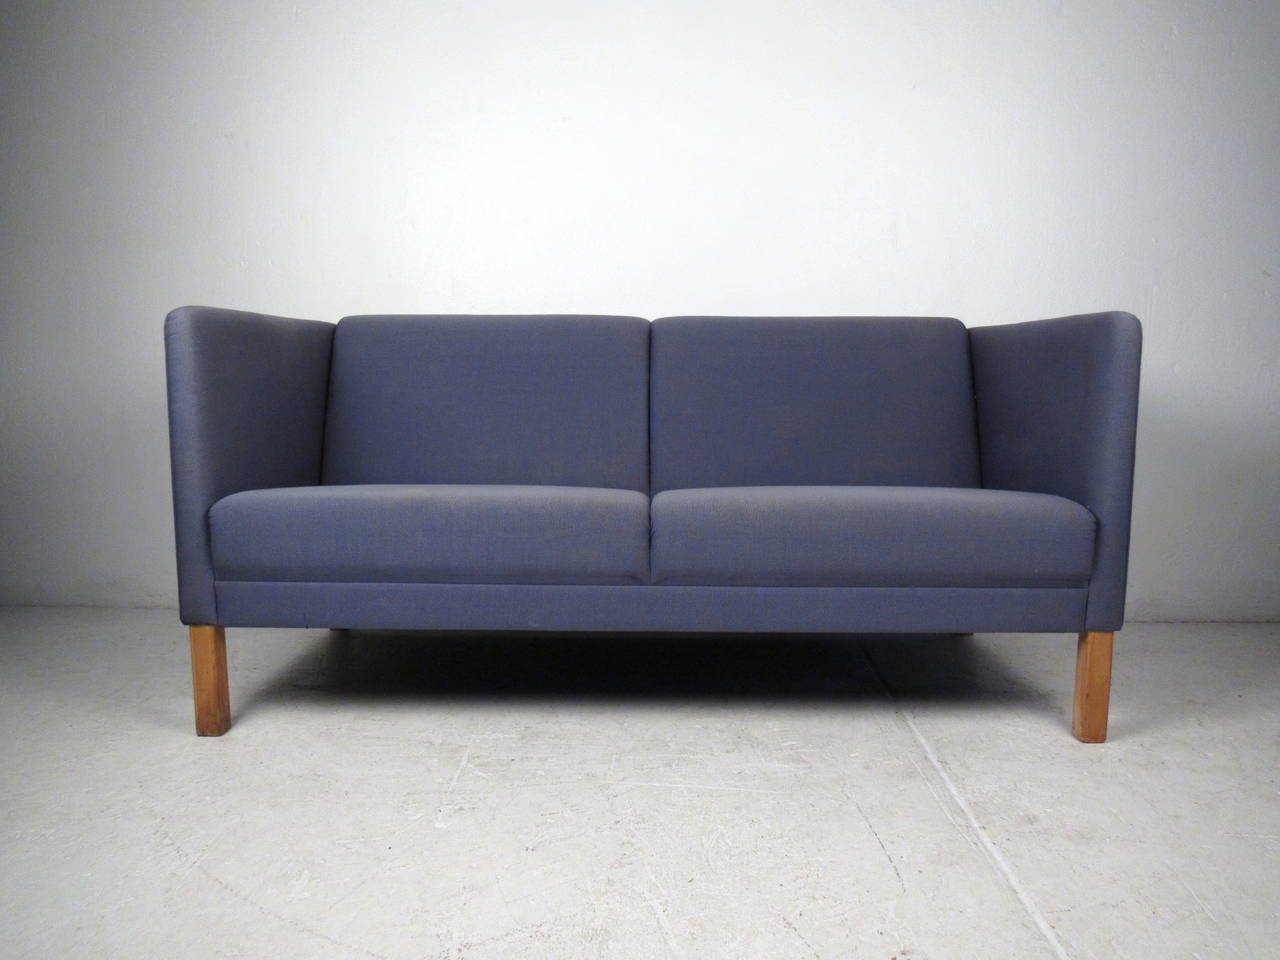 This mid-century modern Danish sofa features clean lines and unique tapered legs. Scandinavian modern style adds a retro flare to any home or office space. Perfect two-seat sofa for home seating area or office waiting room.
Please confirm item